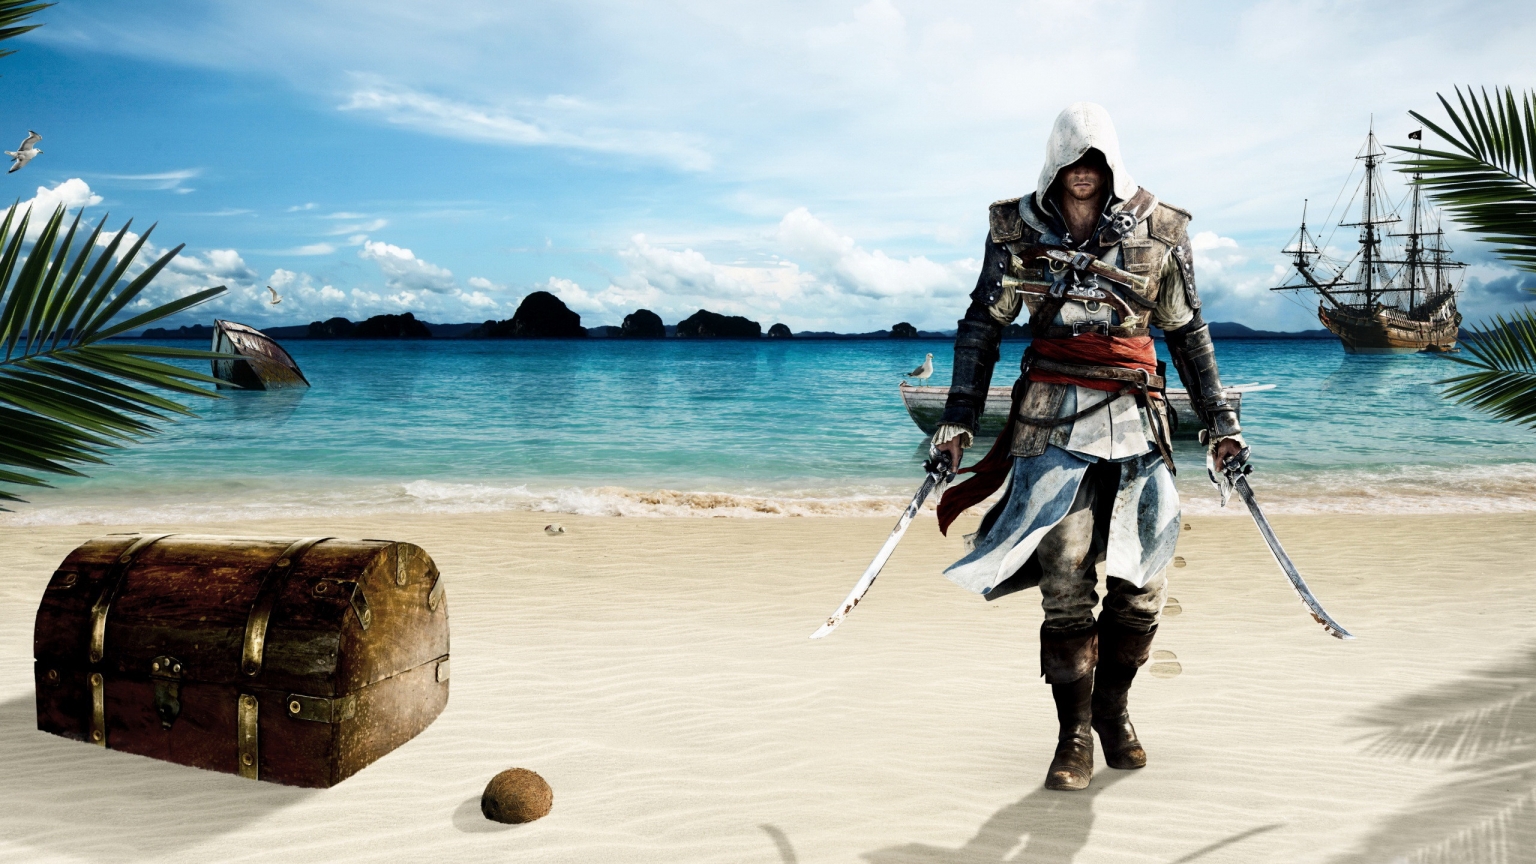 Assassin Creed 4 Beach for 1536 x 864 HDTV resolution